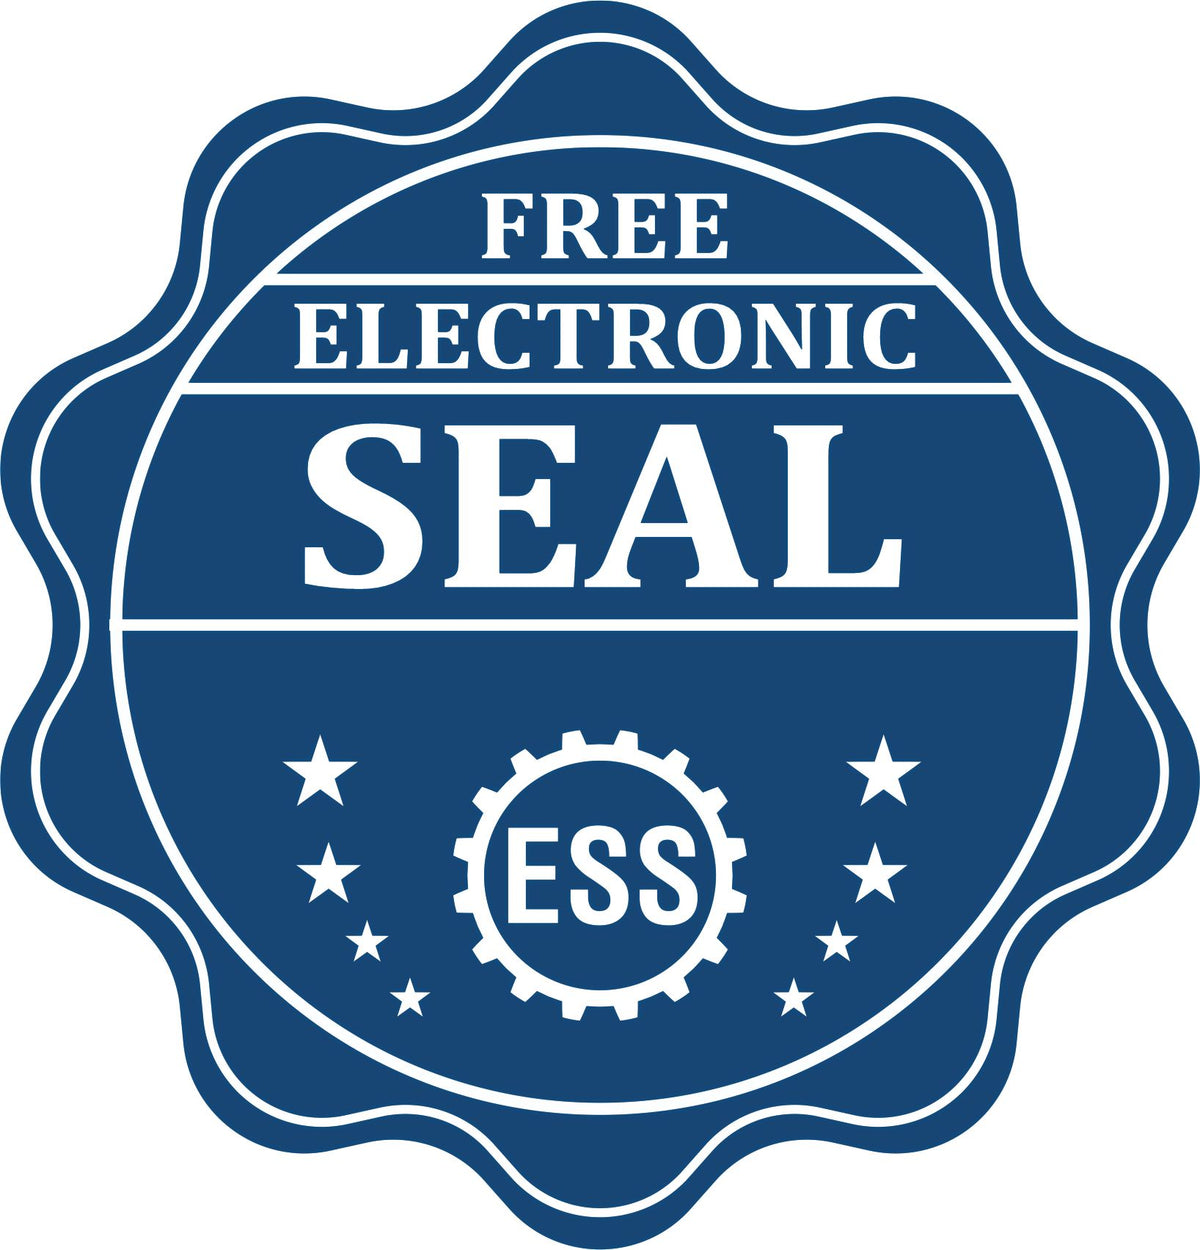 A badge showing a free electronic seal for the Premium MaxLight Pre-Inked Illinois Engineering Stamp with stars and the ESS gear on the emblem.